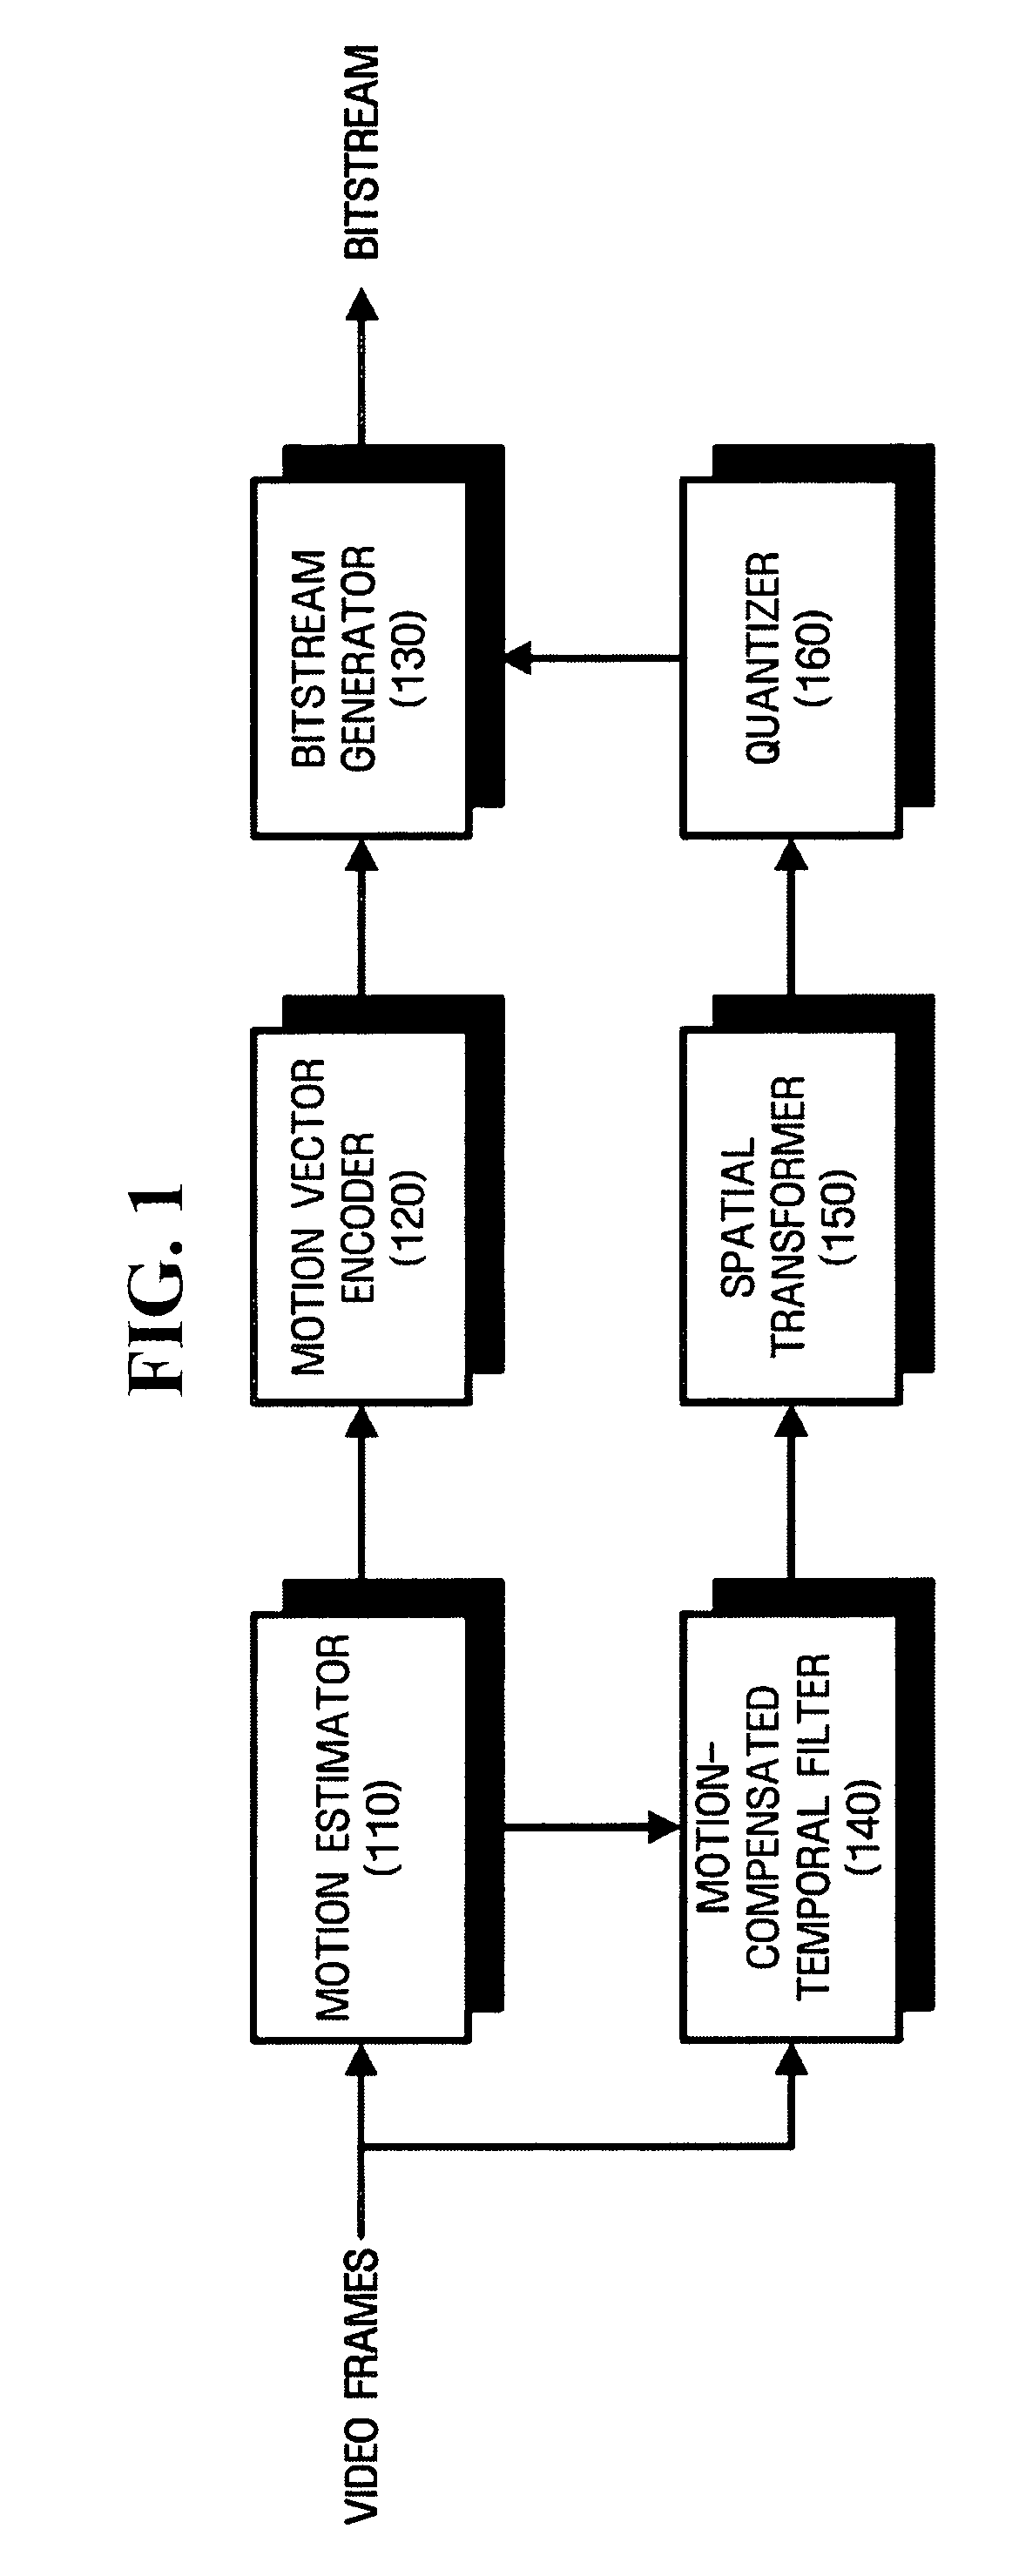 Temporal decomposition and inverse temporal decomposition methods for video encoding and decoding and video encoder and decoder